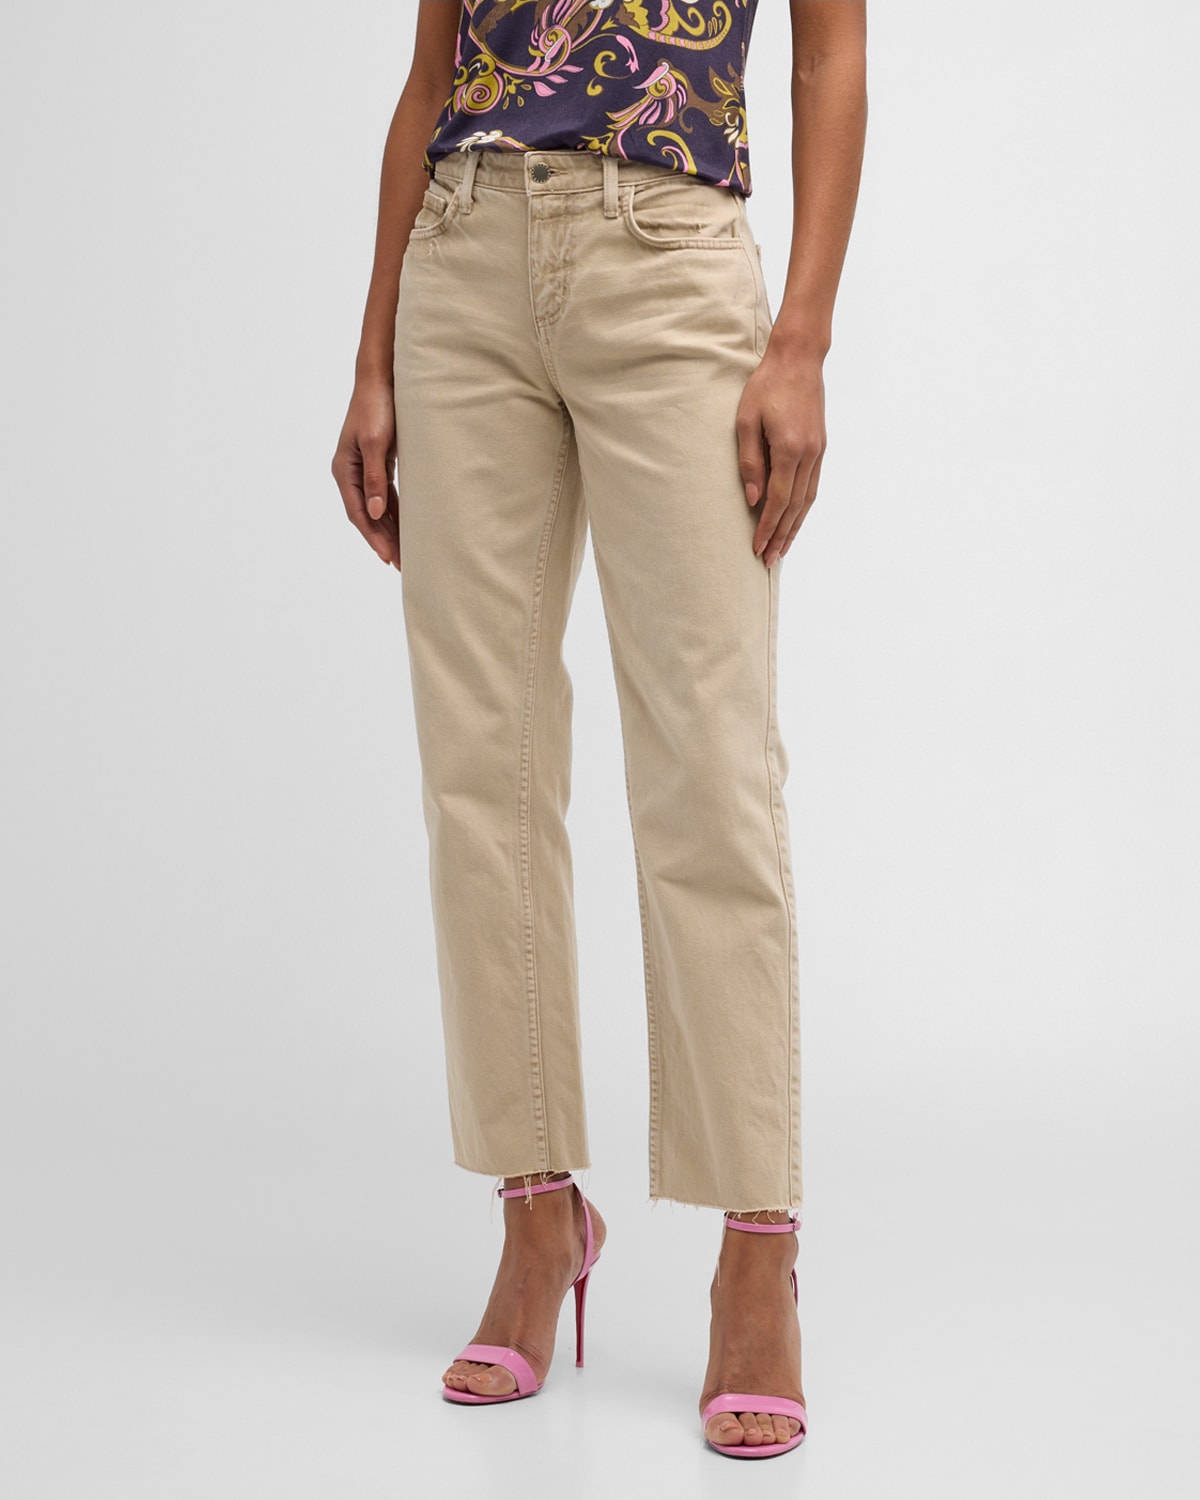 Milana Low-Rise Stovepipe Jeans